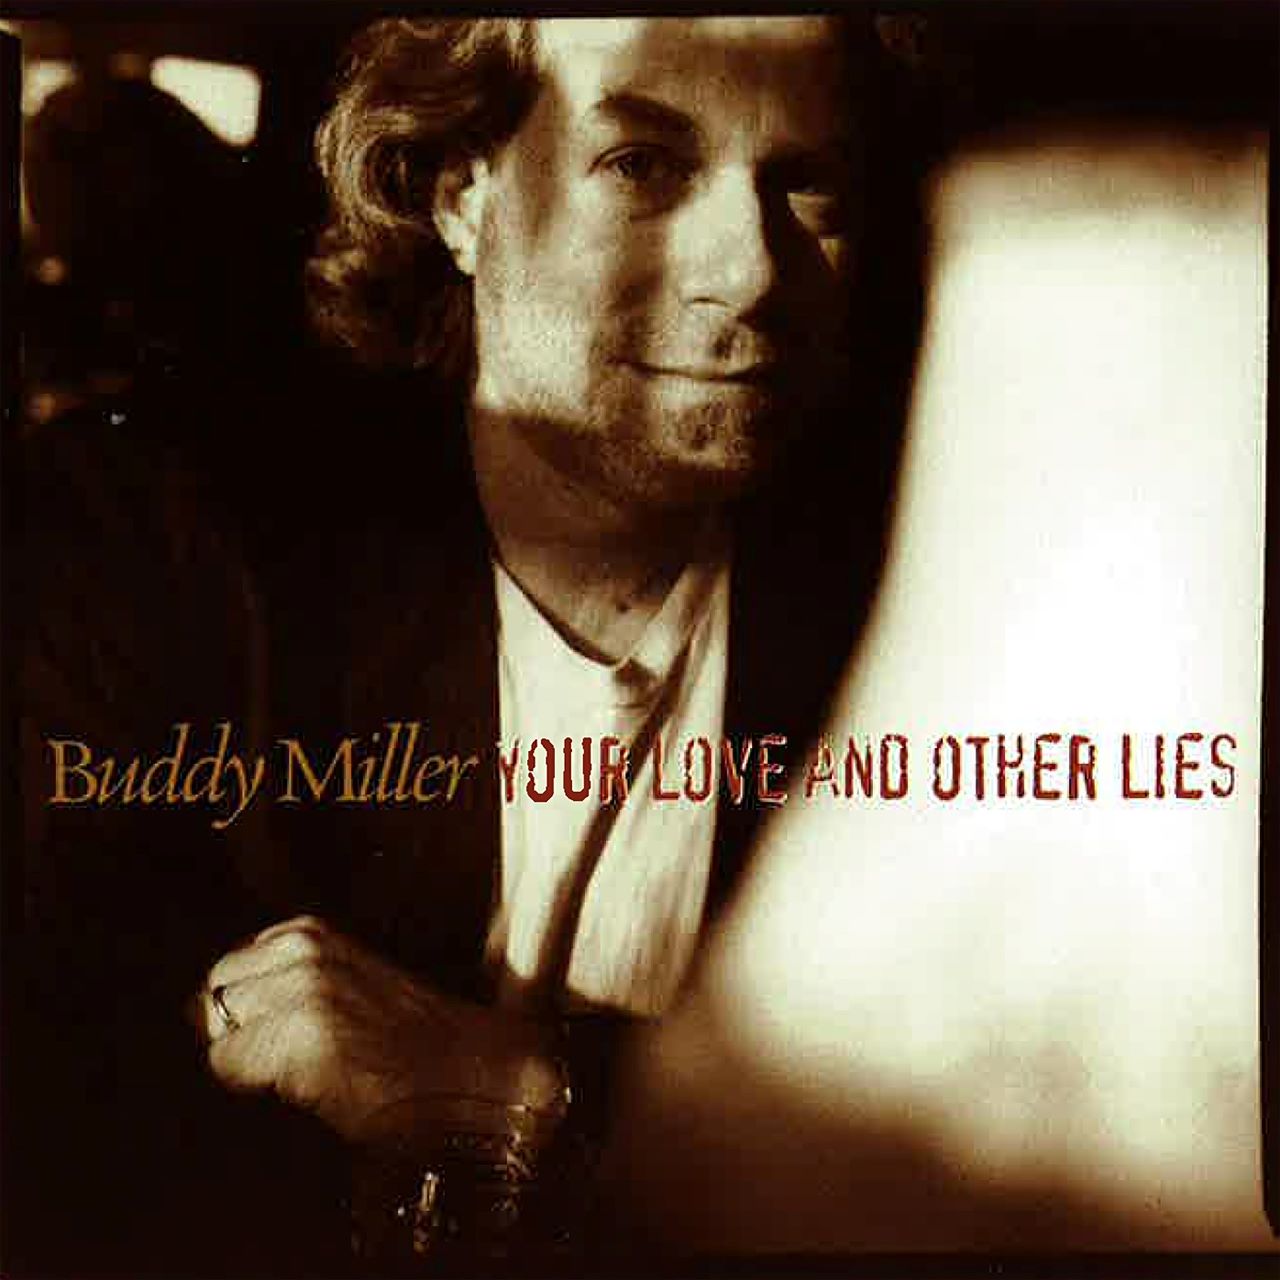 Buddy Miller - Your Love & Other Lies cover album